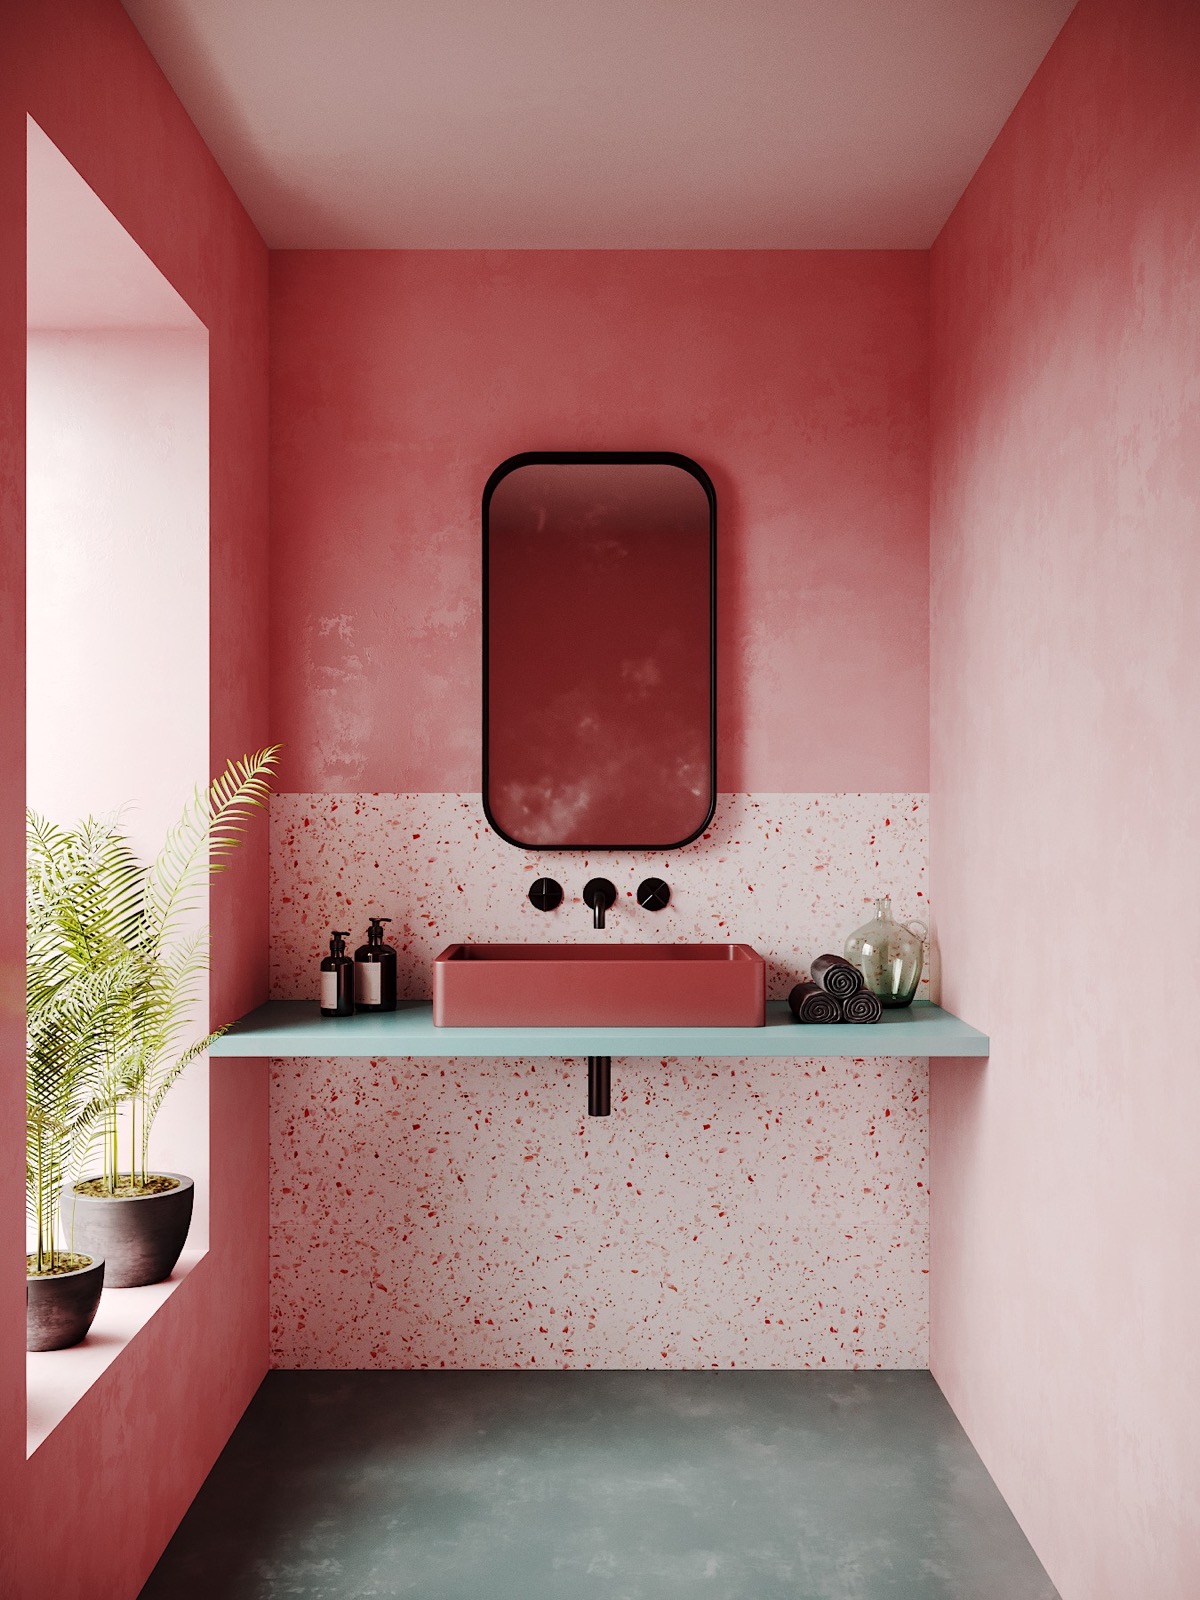 51 Pink Bathrooms With Tips, Photos And Accessories To Help You Decorate  Yours